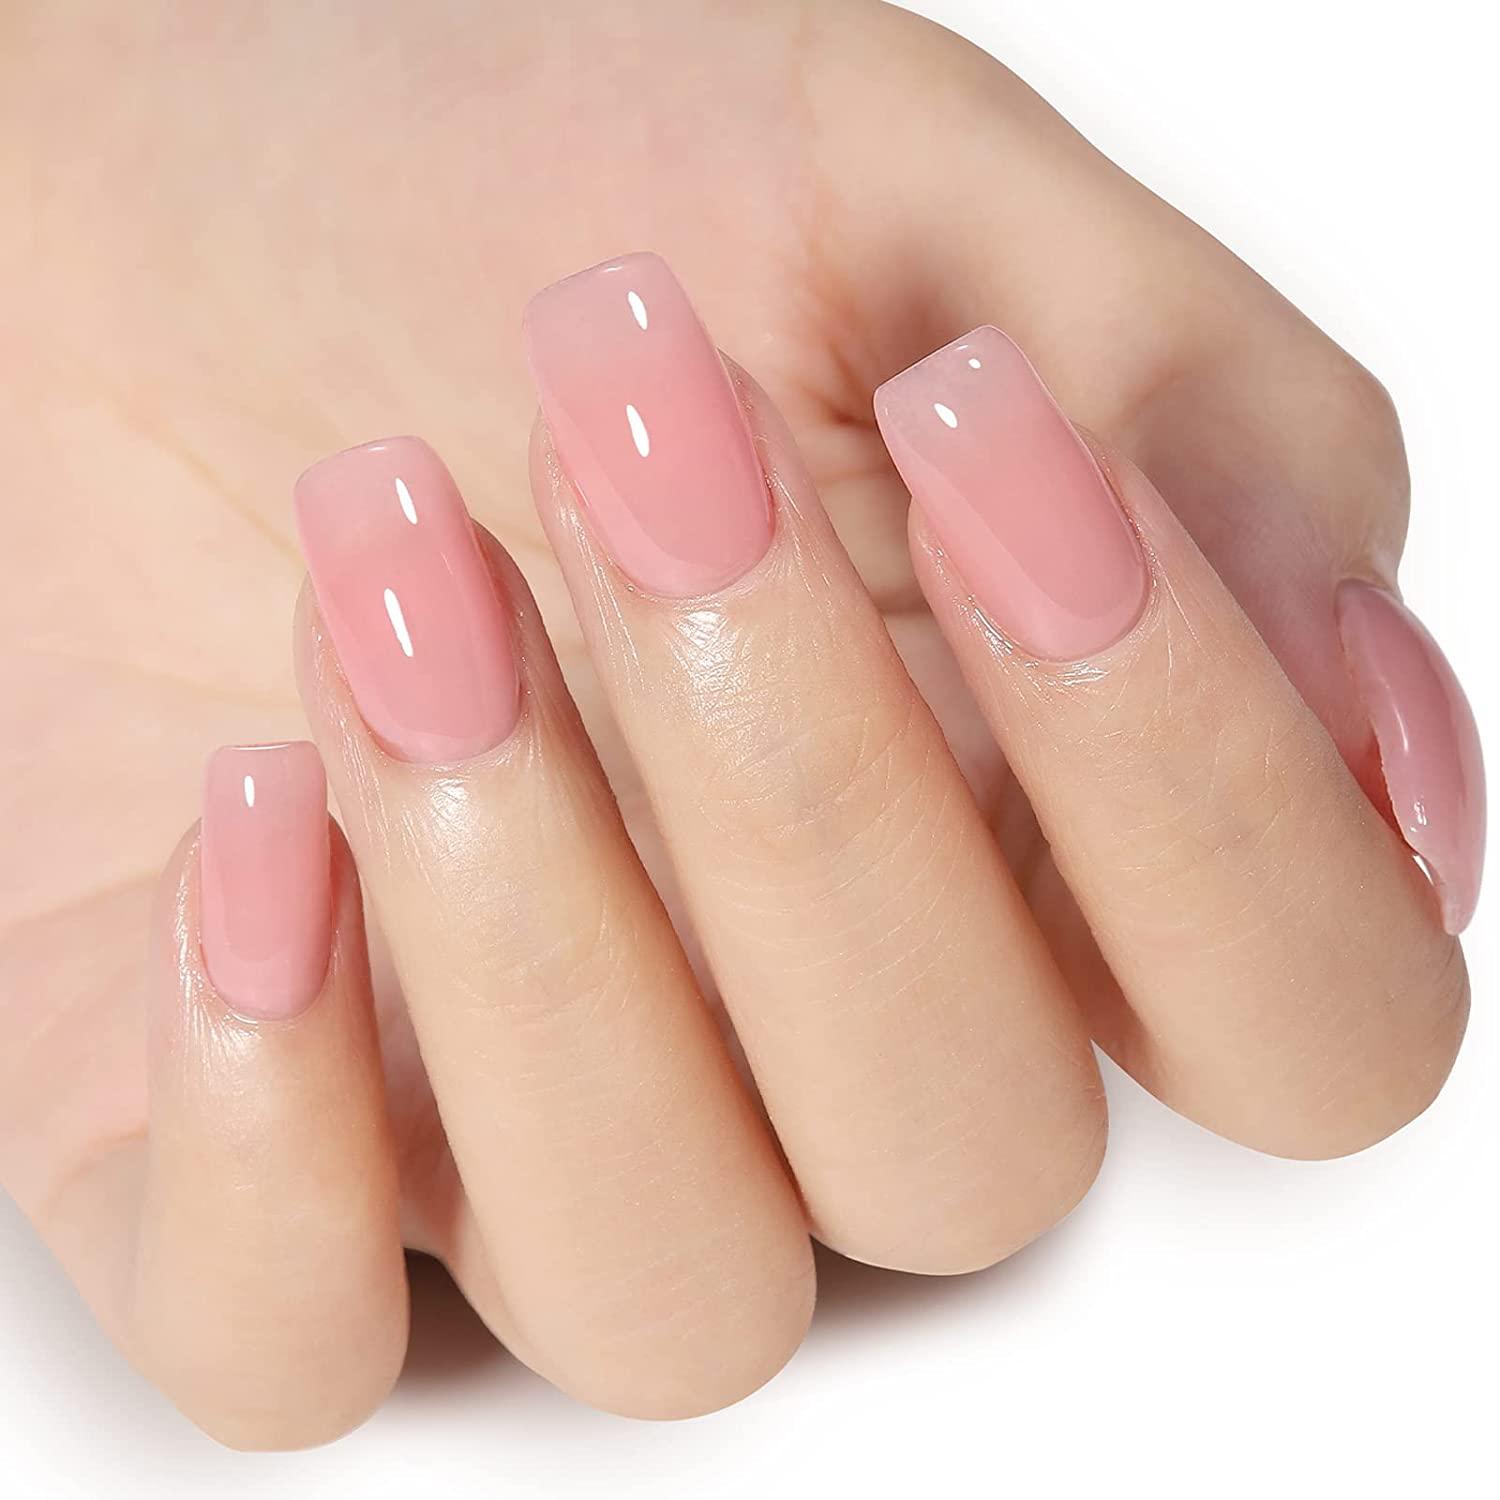 FZANEST Nude Gel Nail Polish LED UV Jelly Milky Transparent Sheer Natural Color  Gel Polish French Manicure Nail Art (Soft Clear Pink) - Walmart.com